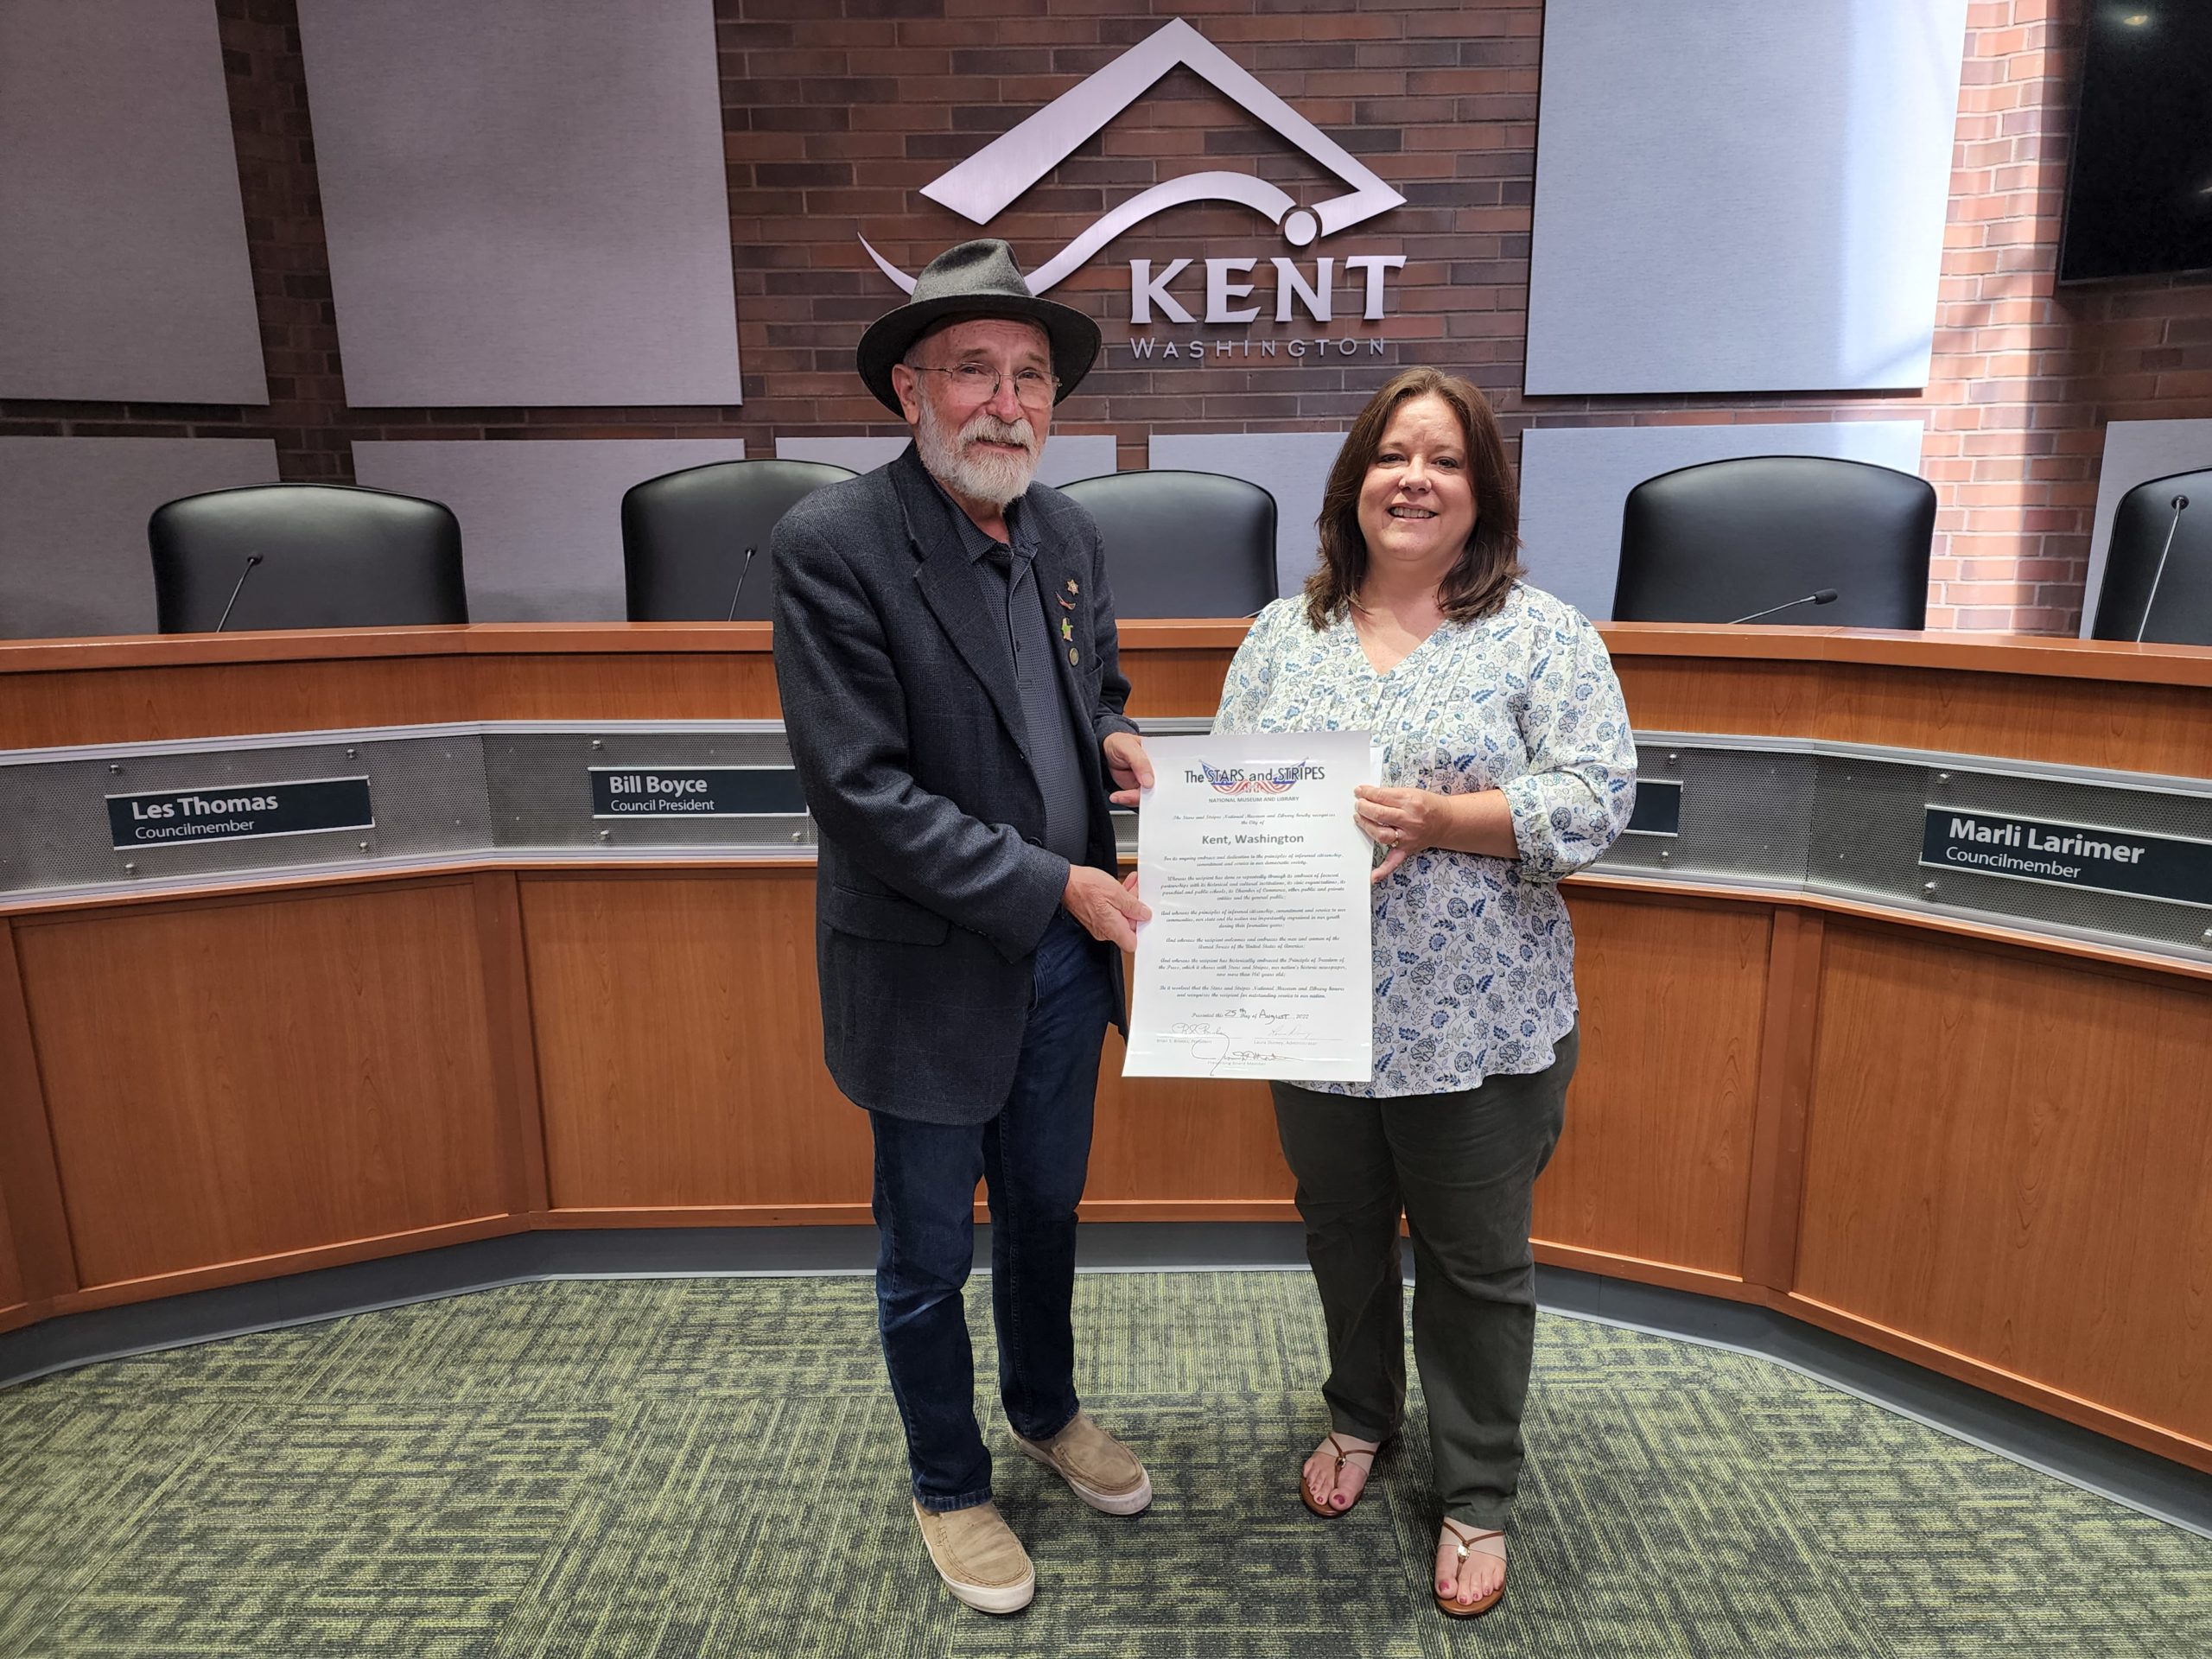 On Thursday, August 25, 2022, Jim Martin presented the Stars and Stripes City Proclamation to Kent, Washington